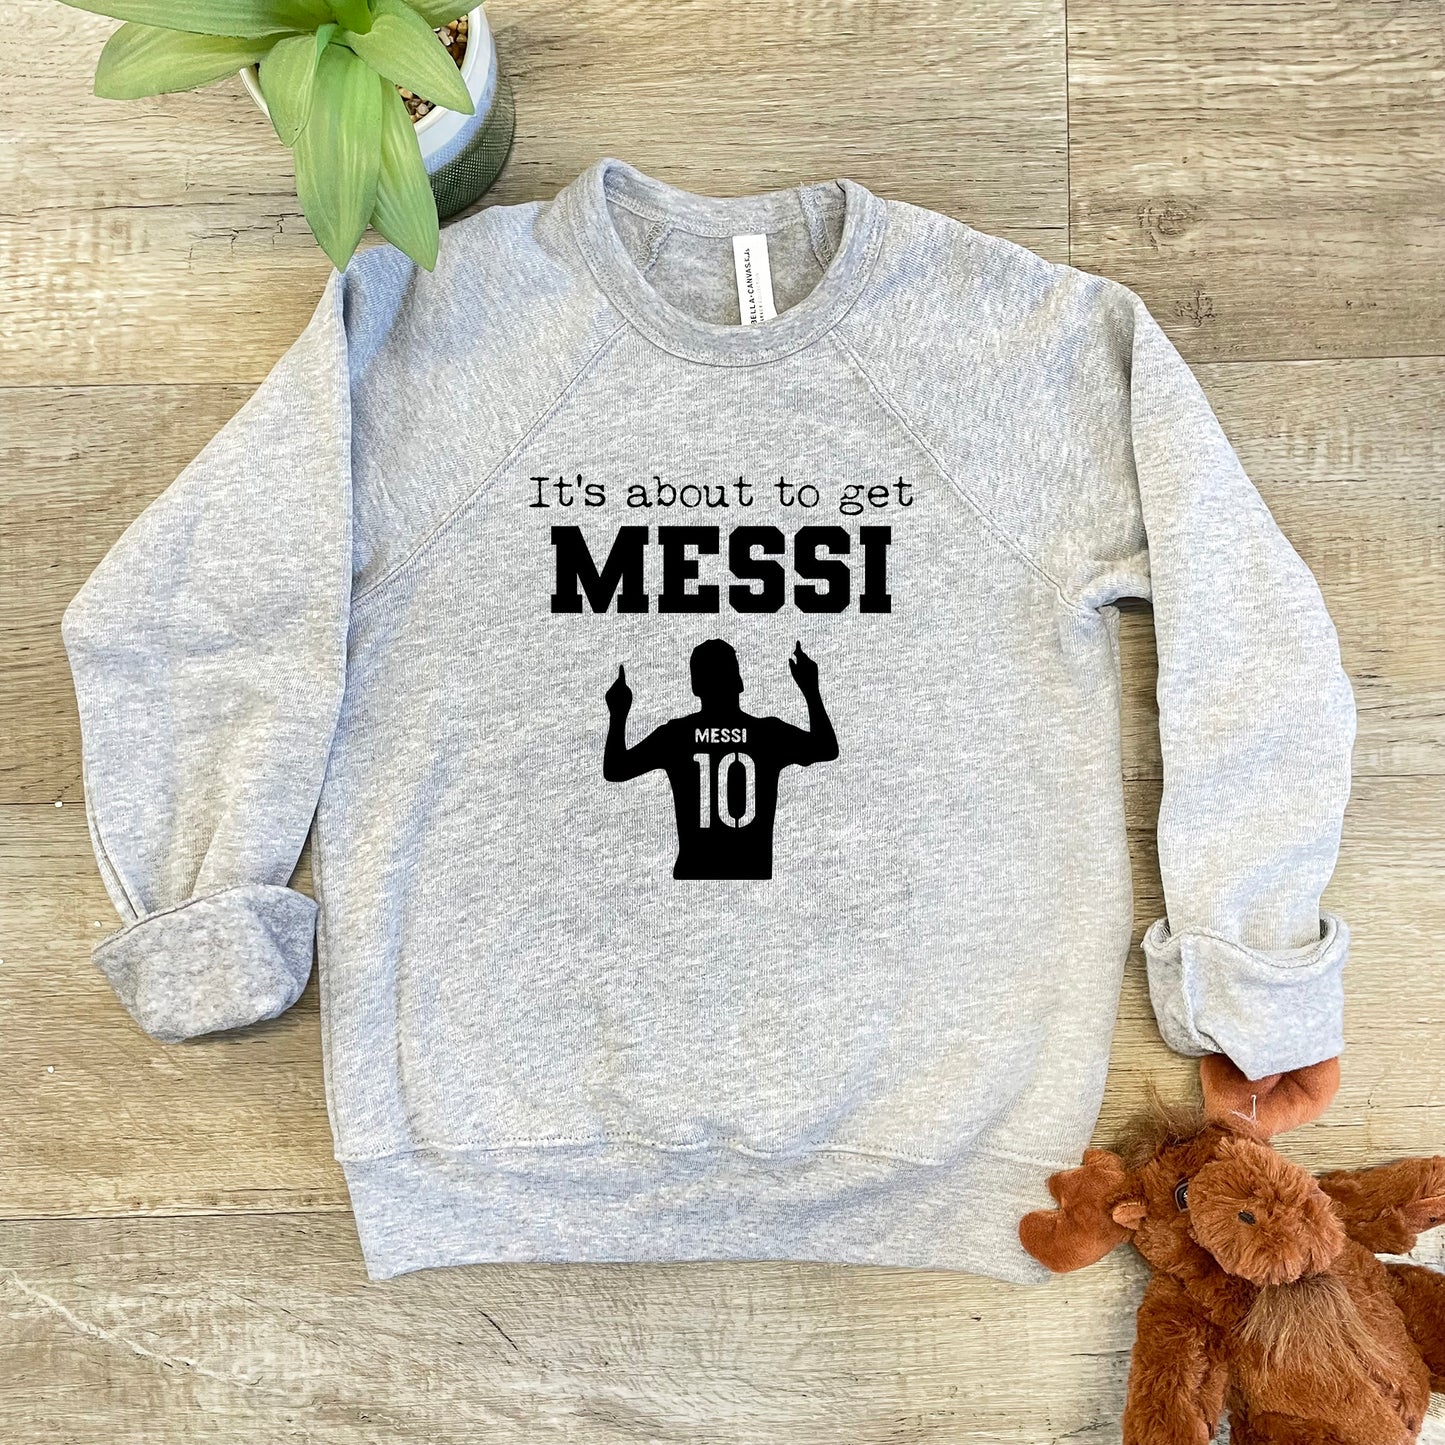 It's About To Get Messi (Soccer) - Kid's Sweatshirt - Heather Gray or Mauve